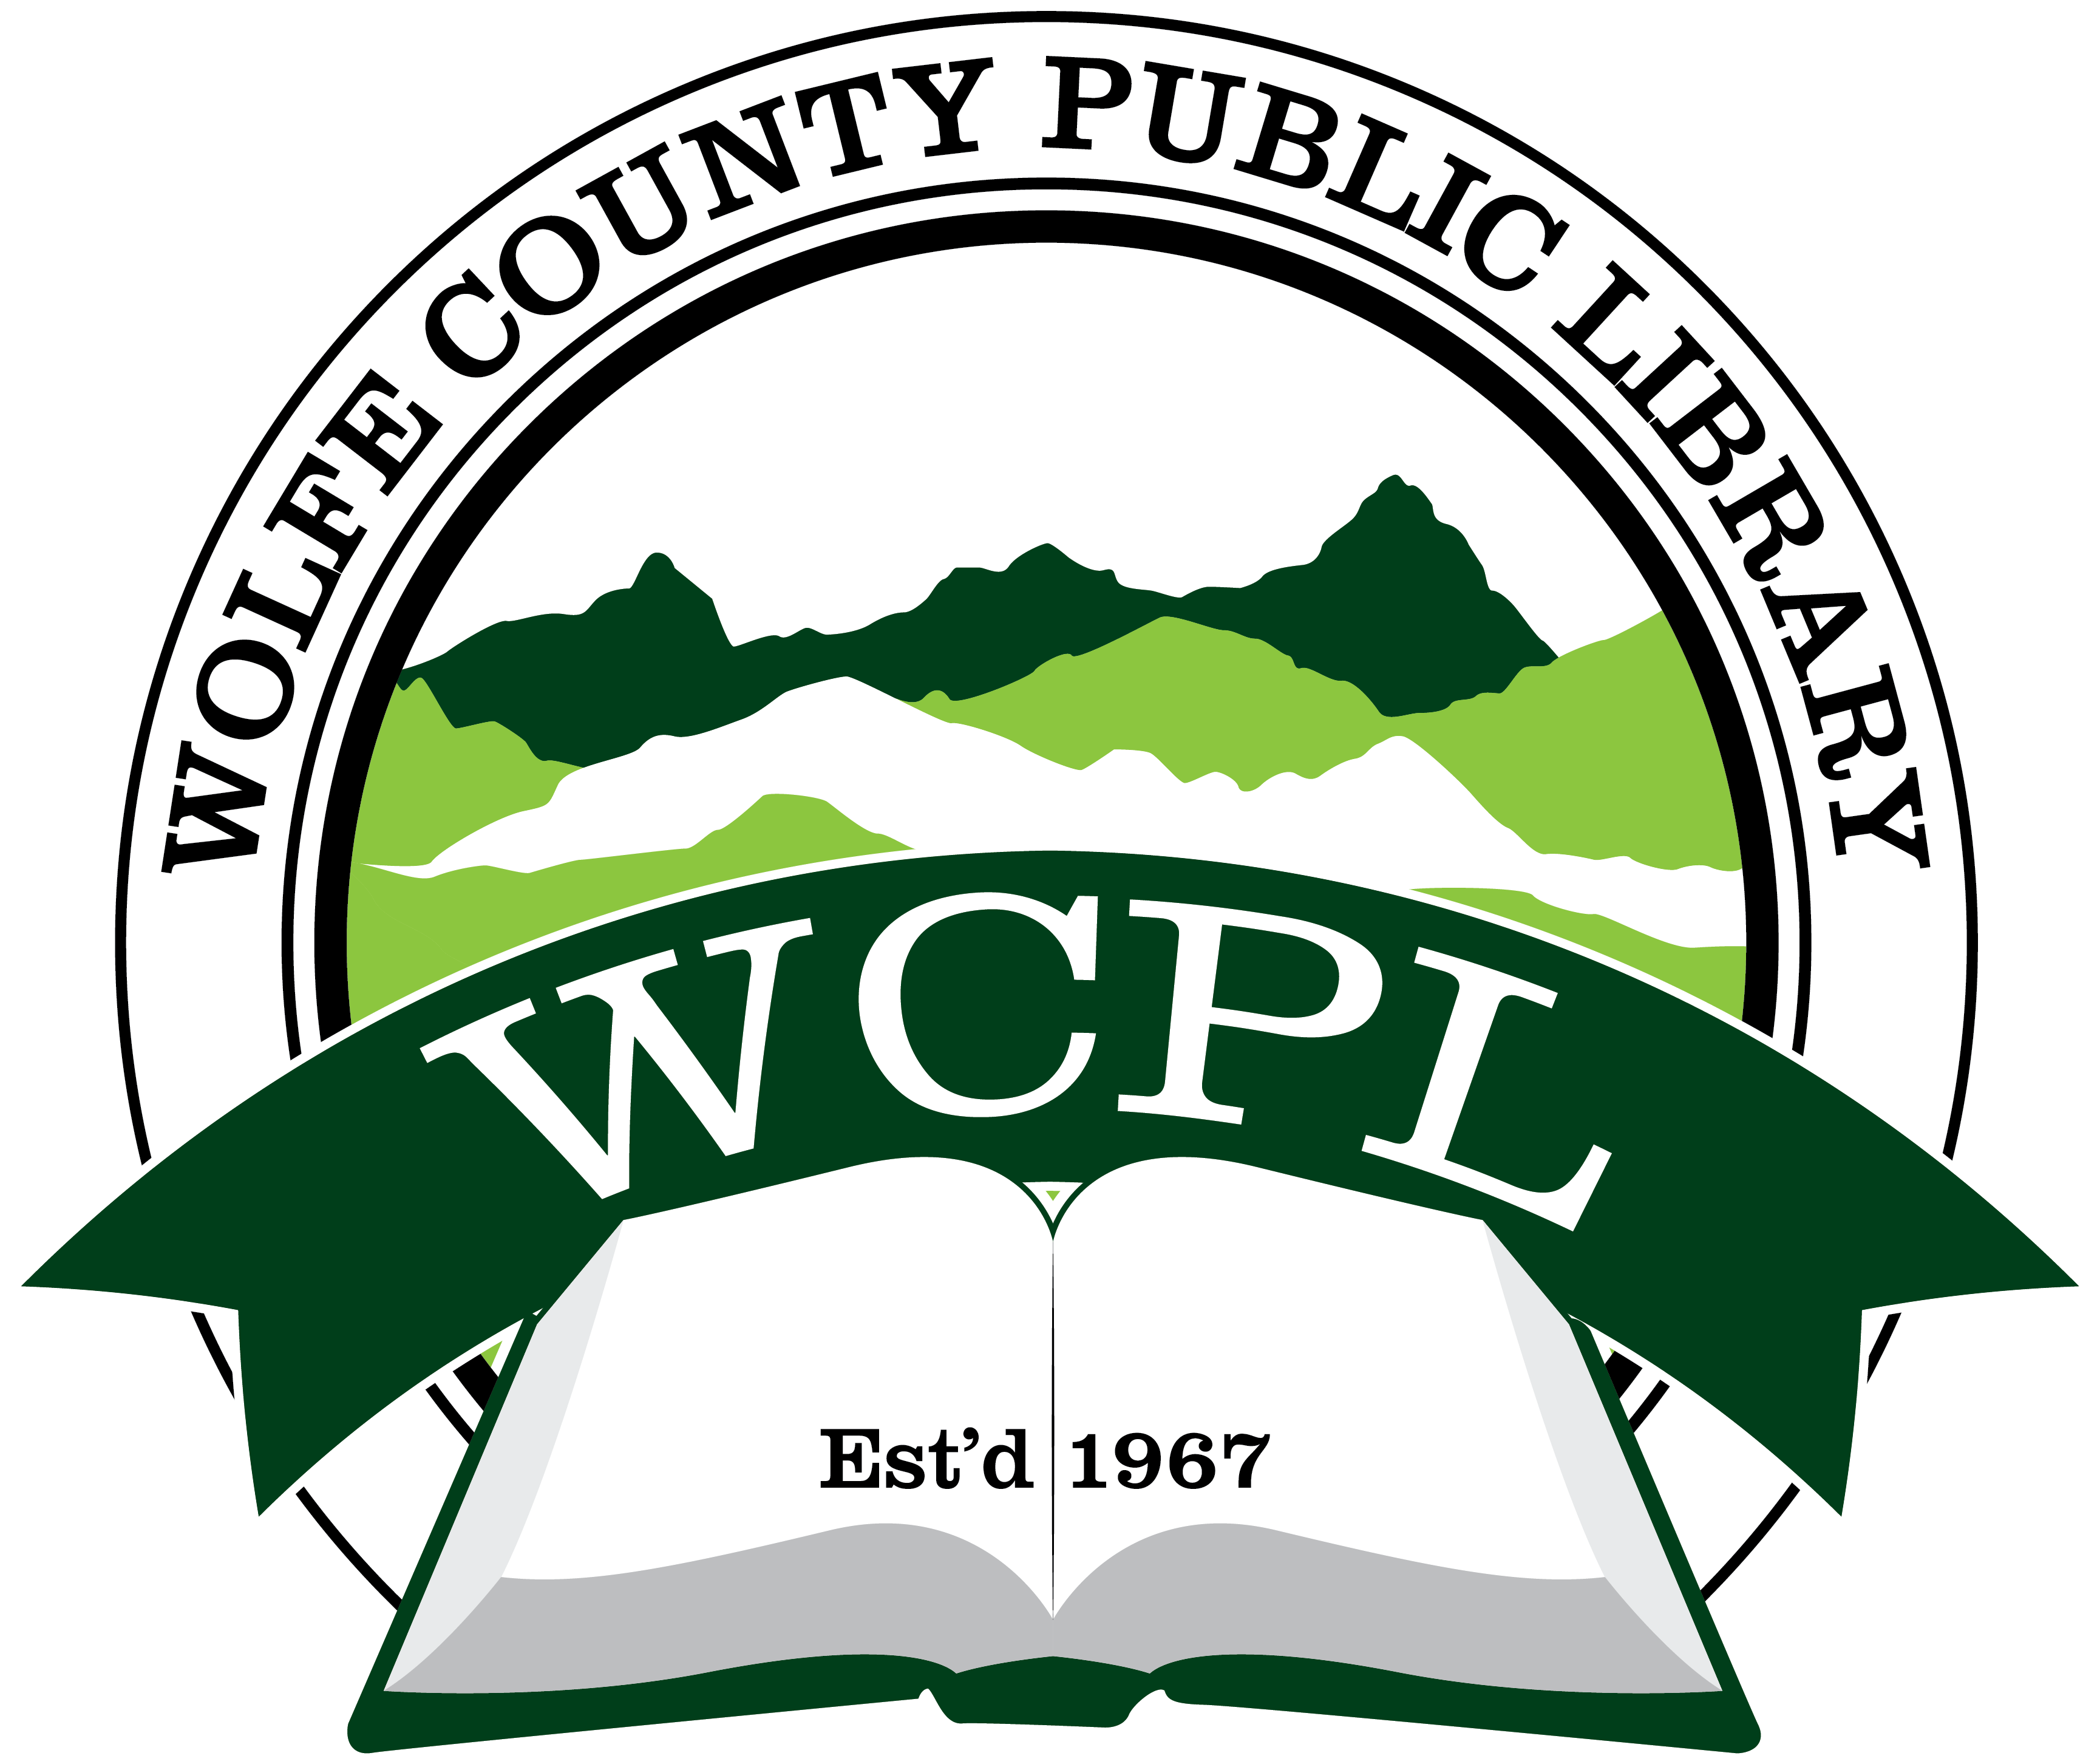 Library Logo - Library logo design for Wolfe County Public Library in Campton, Kentucky